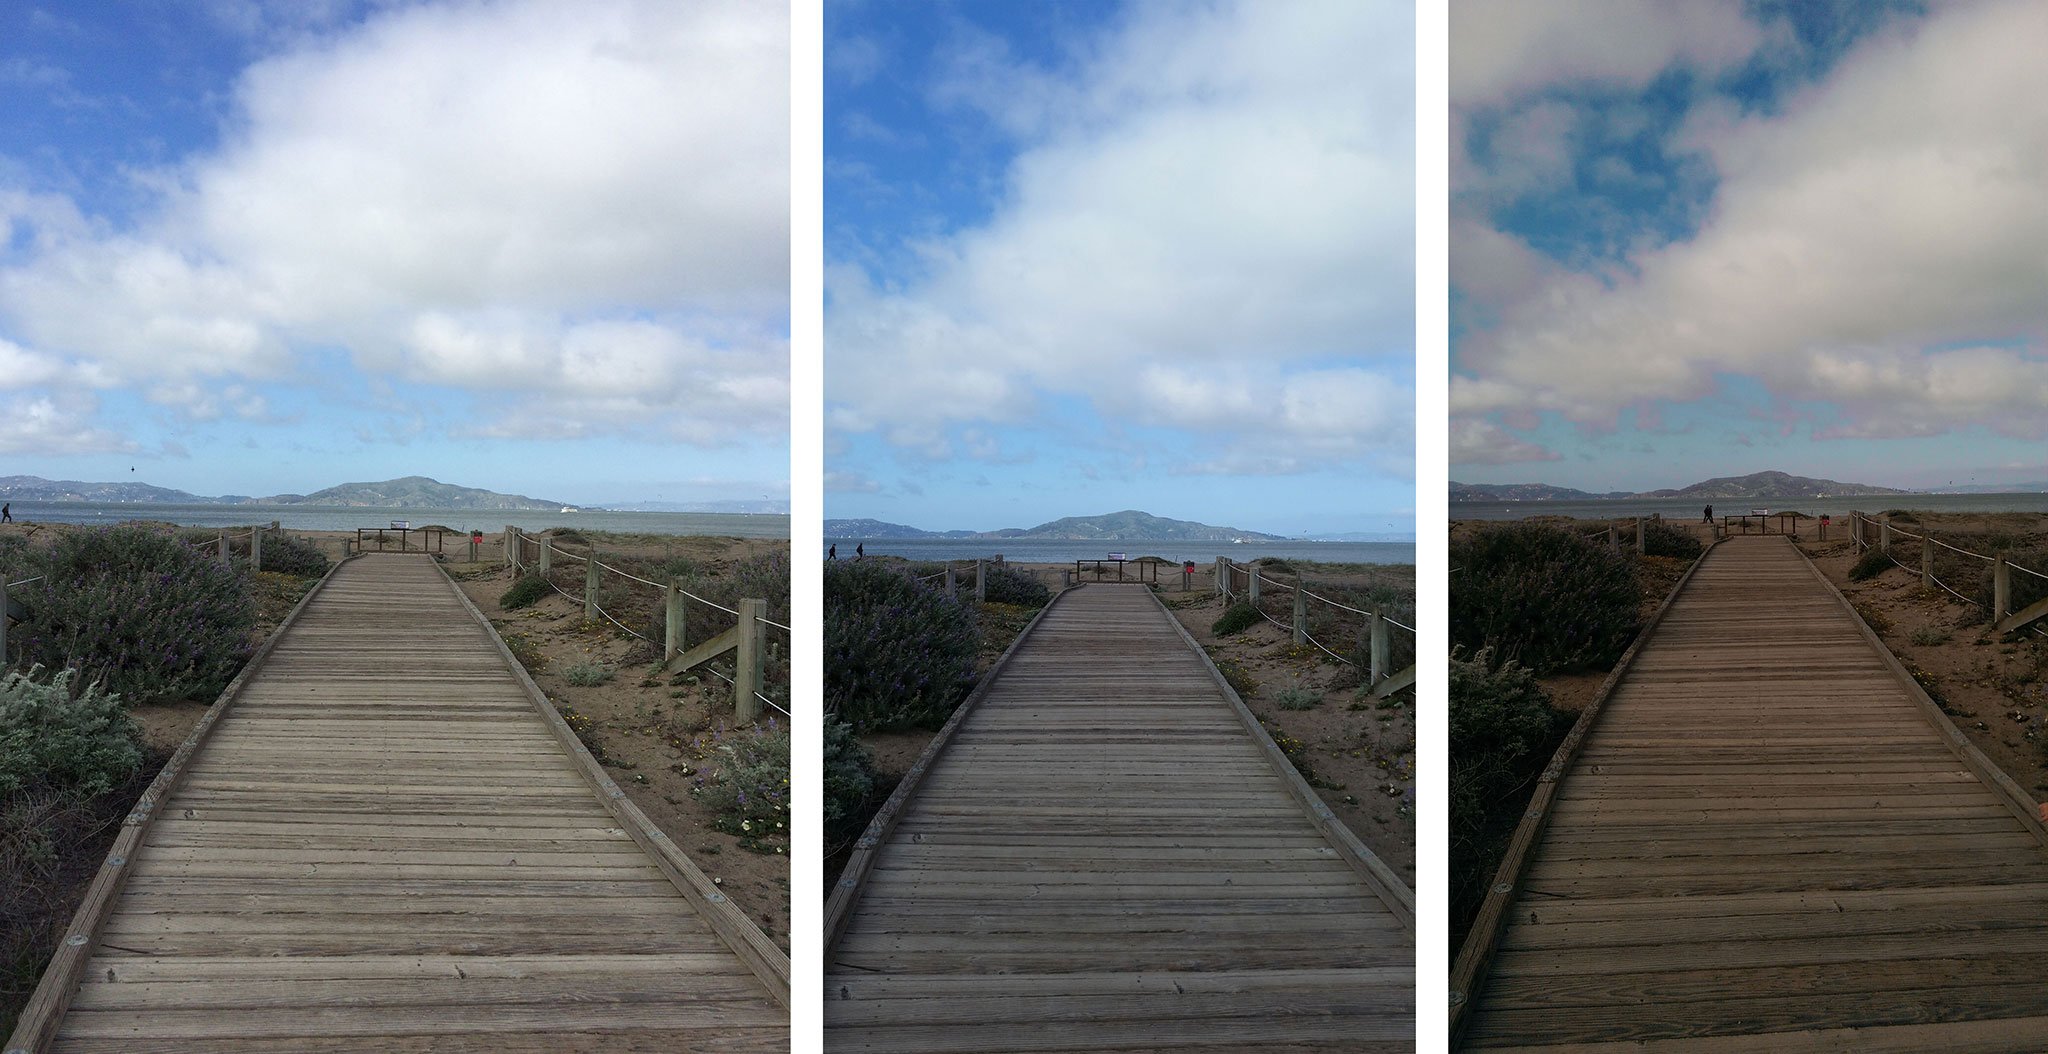 iPhone 5s vs. Galaxy S5 vs. HTC One M8: Everyday and HDR photography